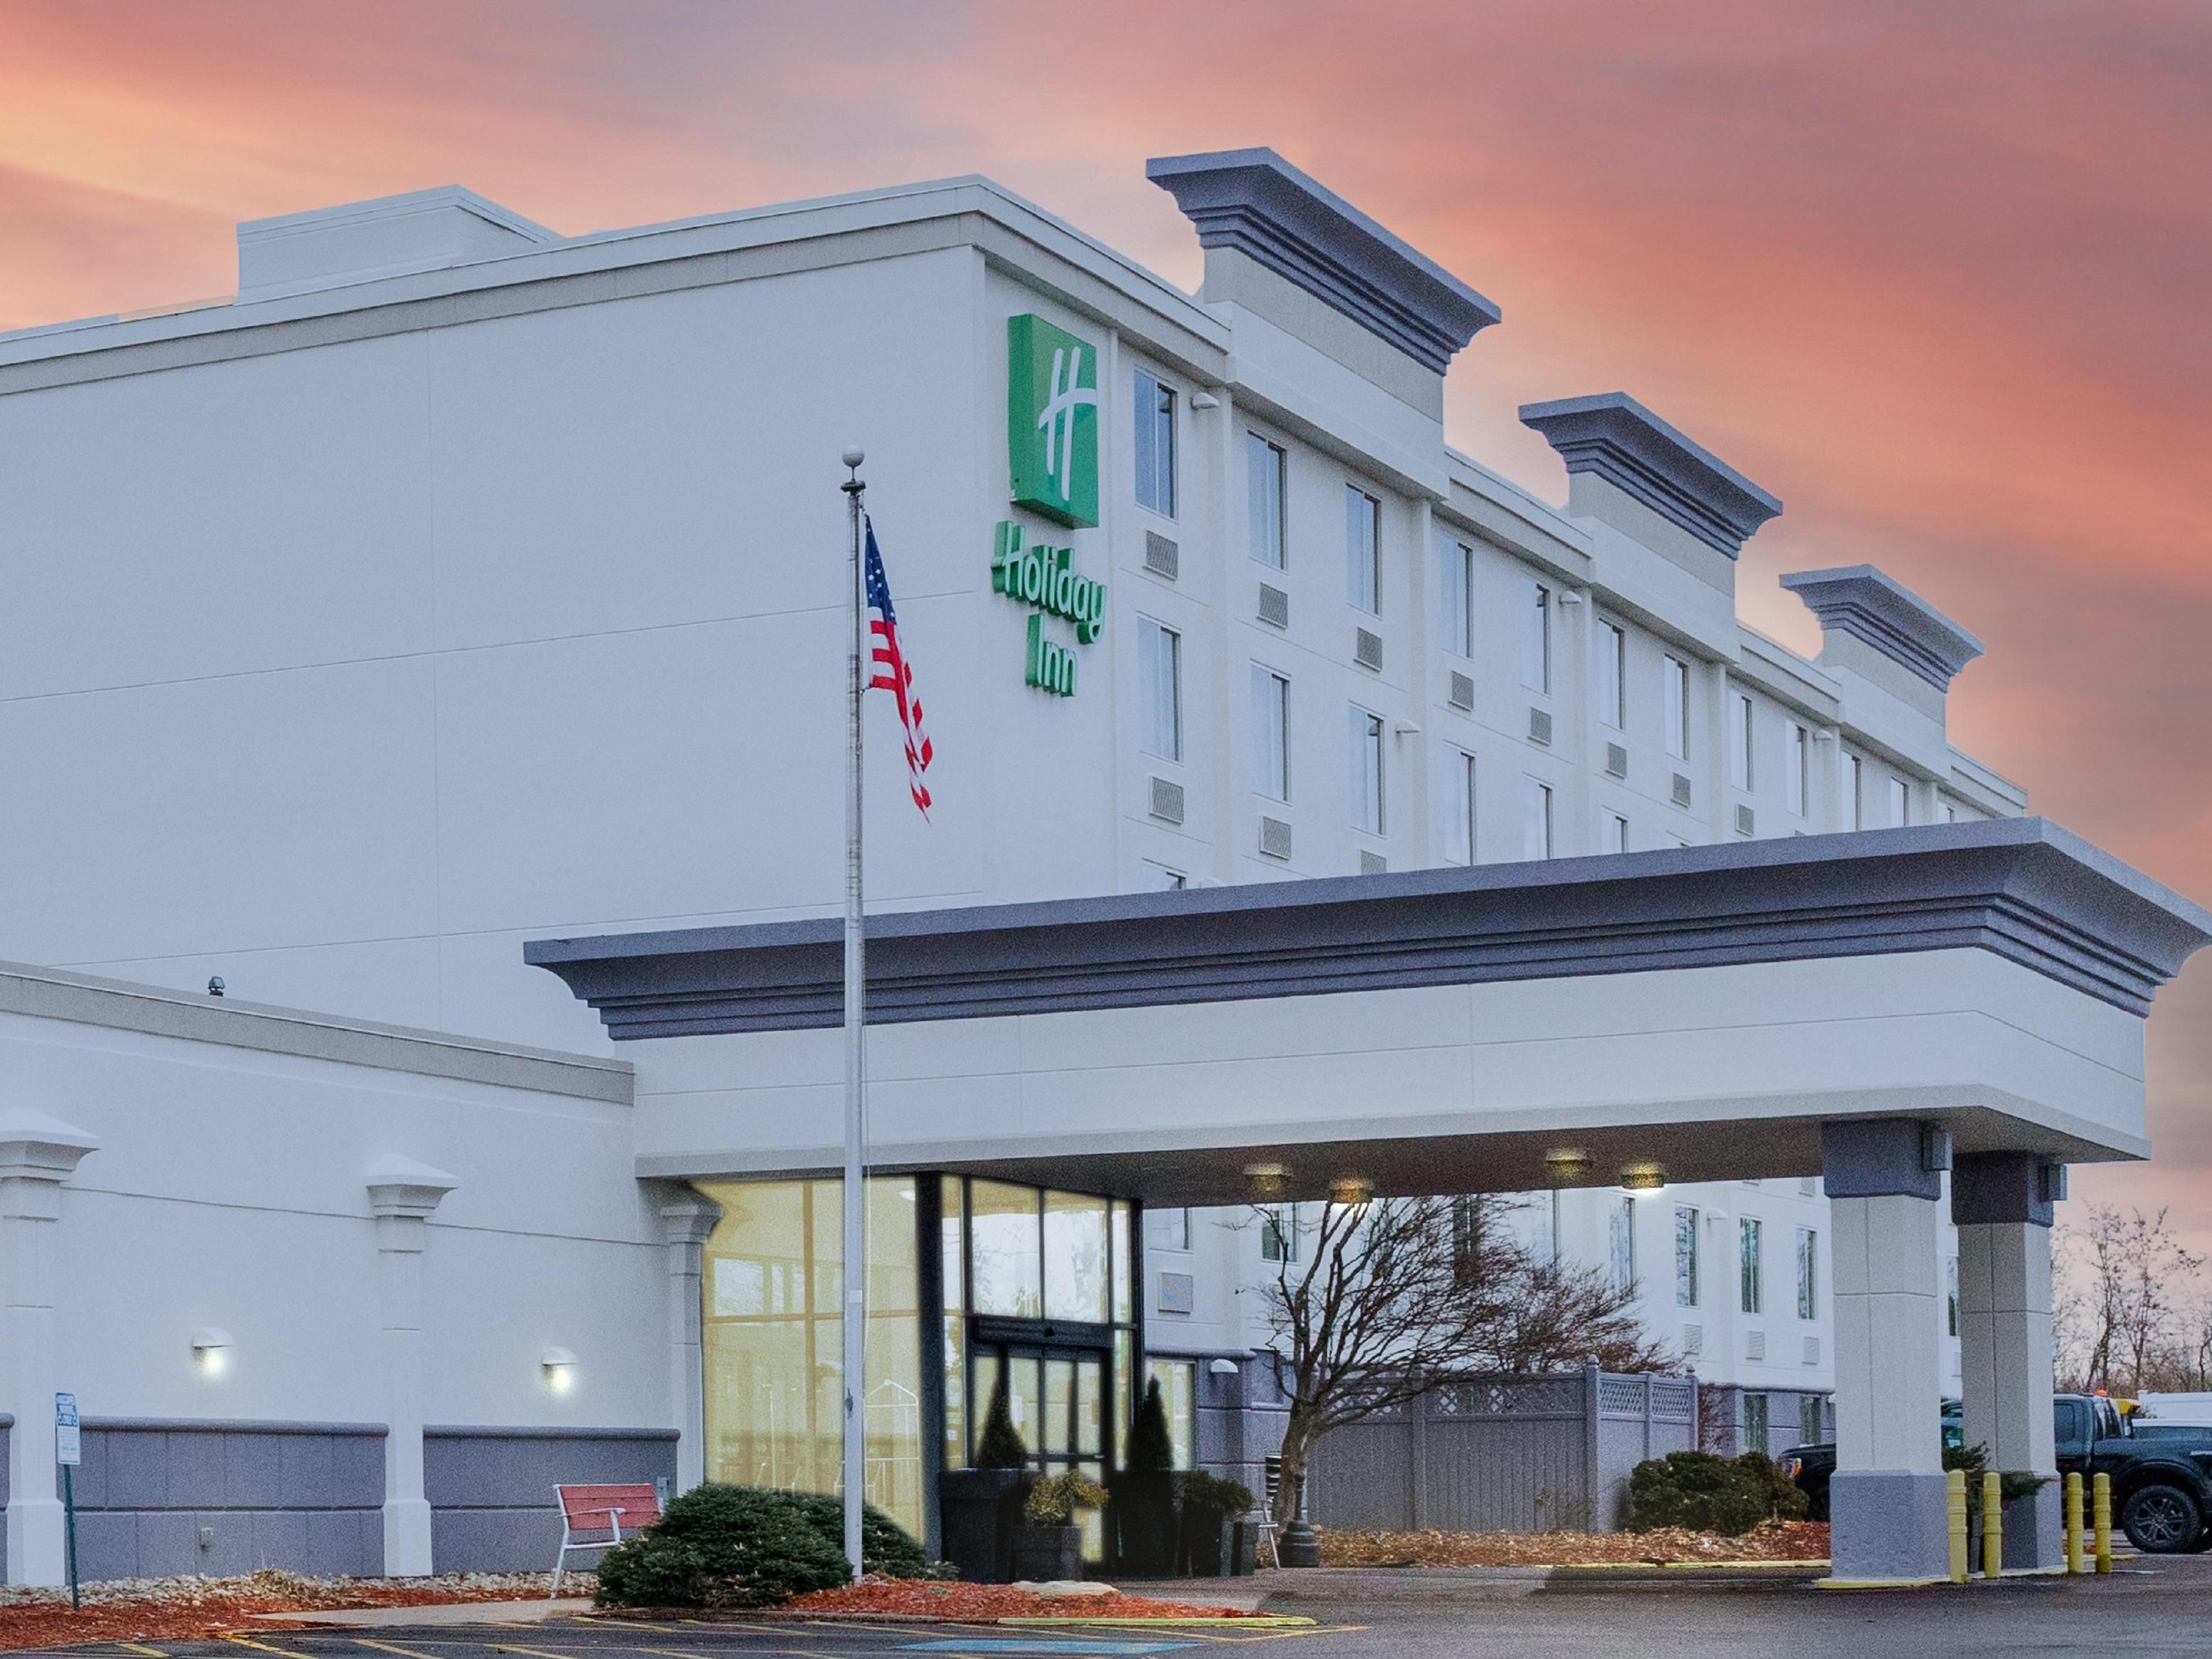 Visiting Weirton/Steubenville Area for a work, long term stay or a special event? Contact our Director of Sales  Brad at 304-723-5522 or Brad@HolidayInnWeirton.com. We can assist you in setting up overnight accommodations for your group or your corporate travel needs in the area. Learn more about the hotel and everything we offer by clicking below.